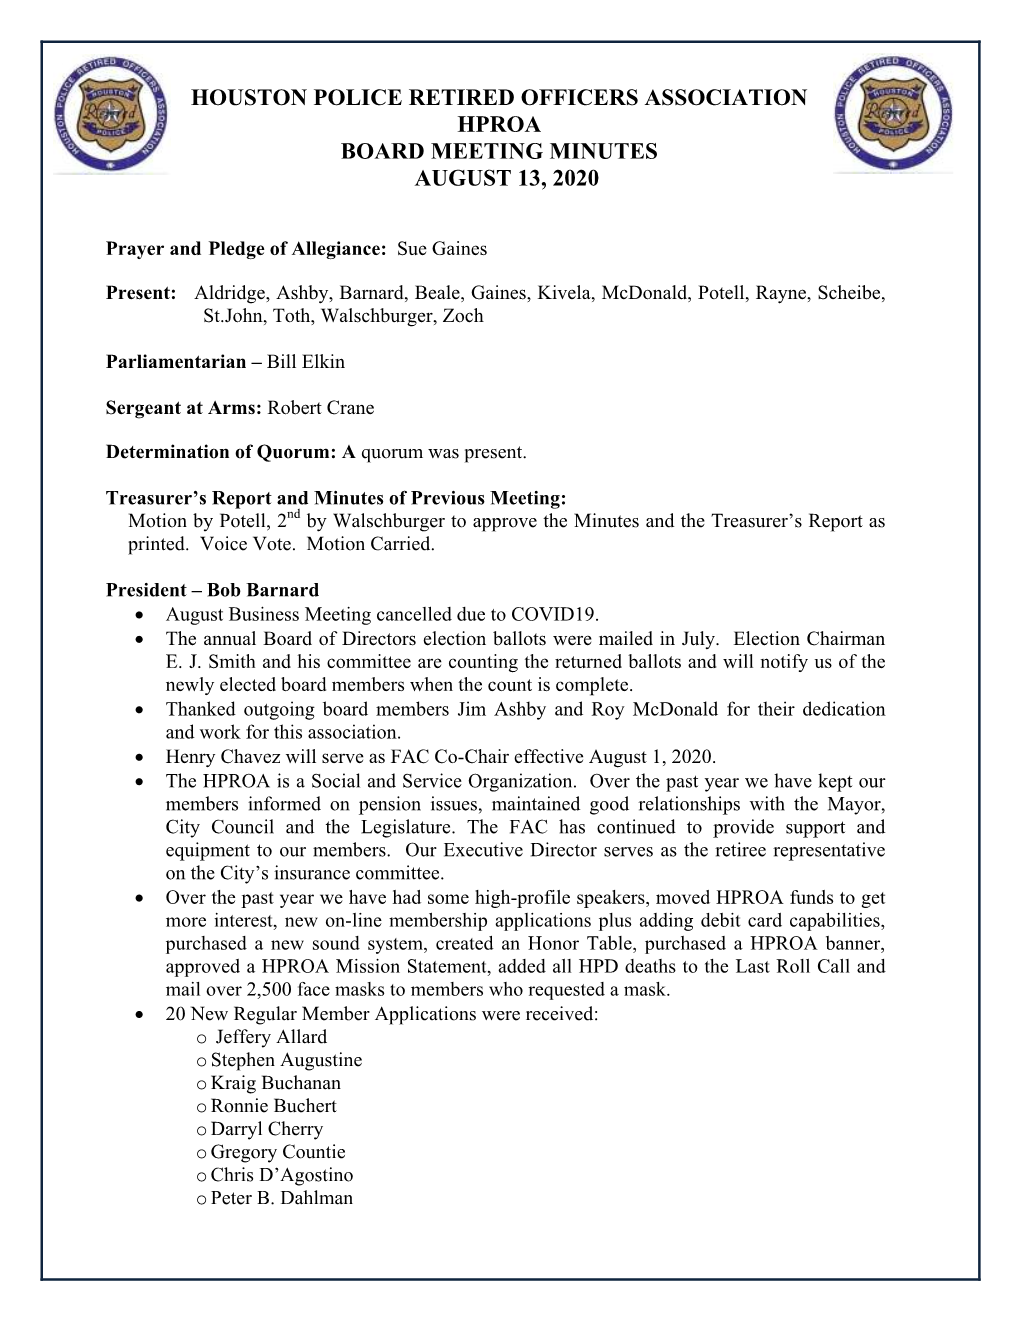 Houston Police Retired Officers Association Hproa Board Meeting Minutes August 13, 2020